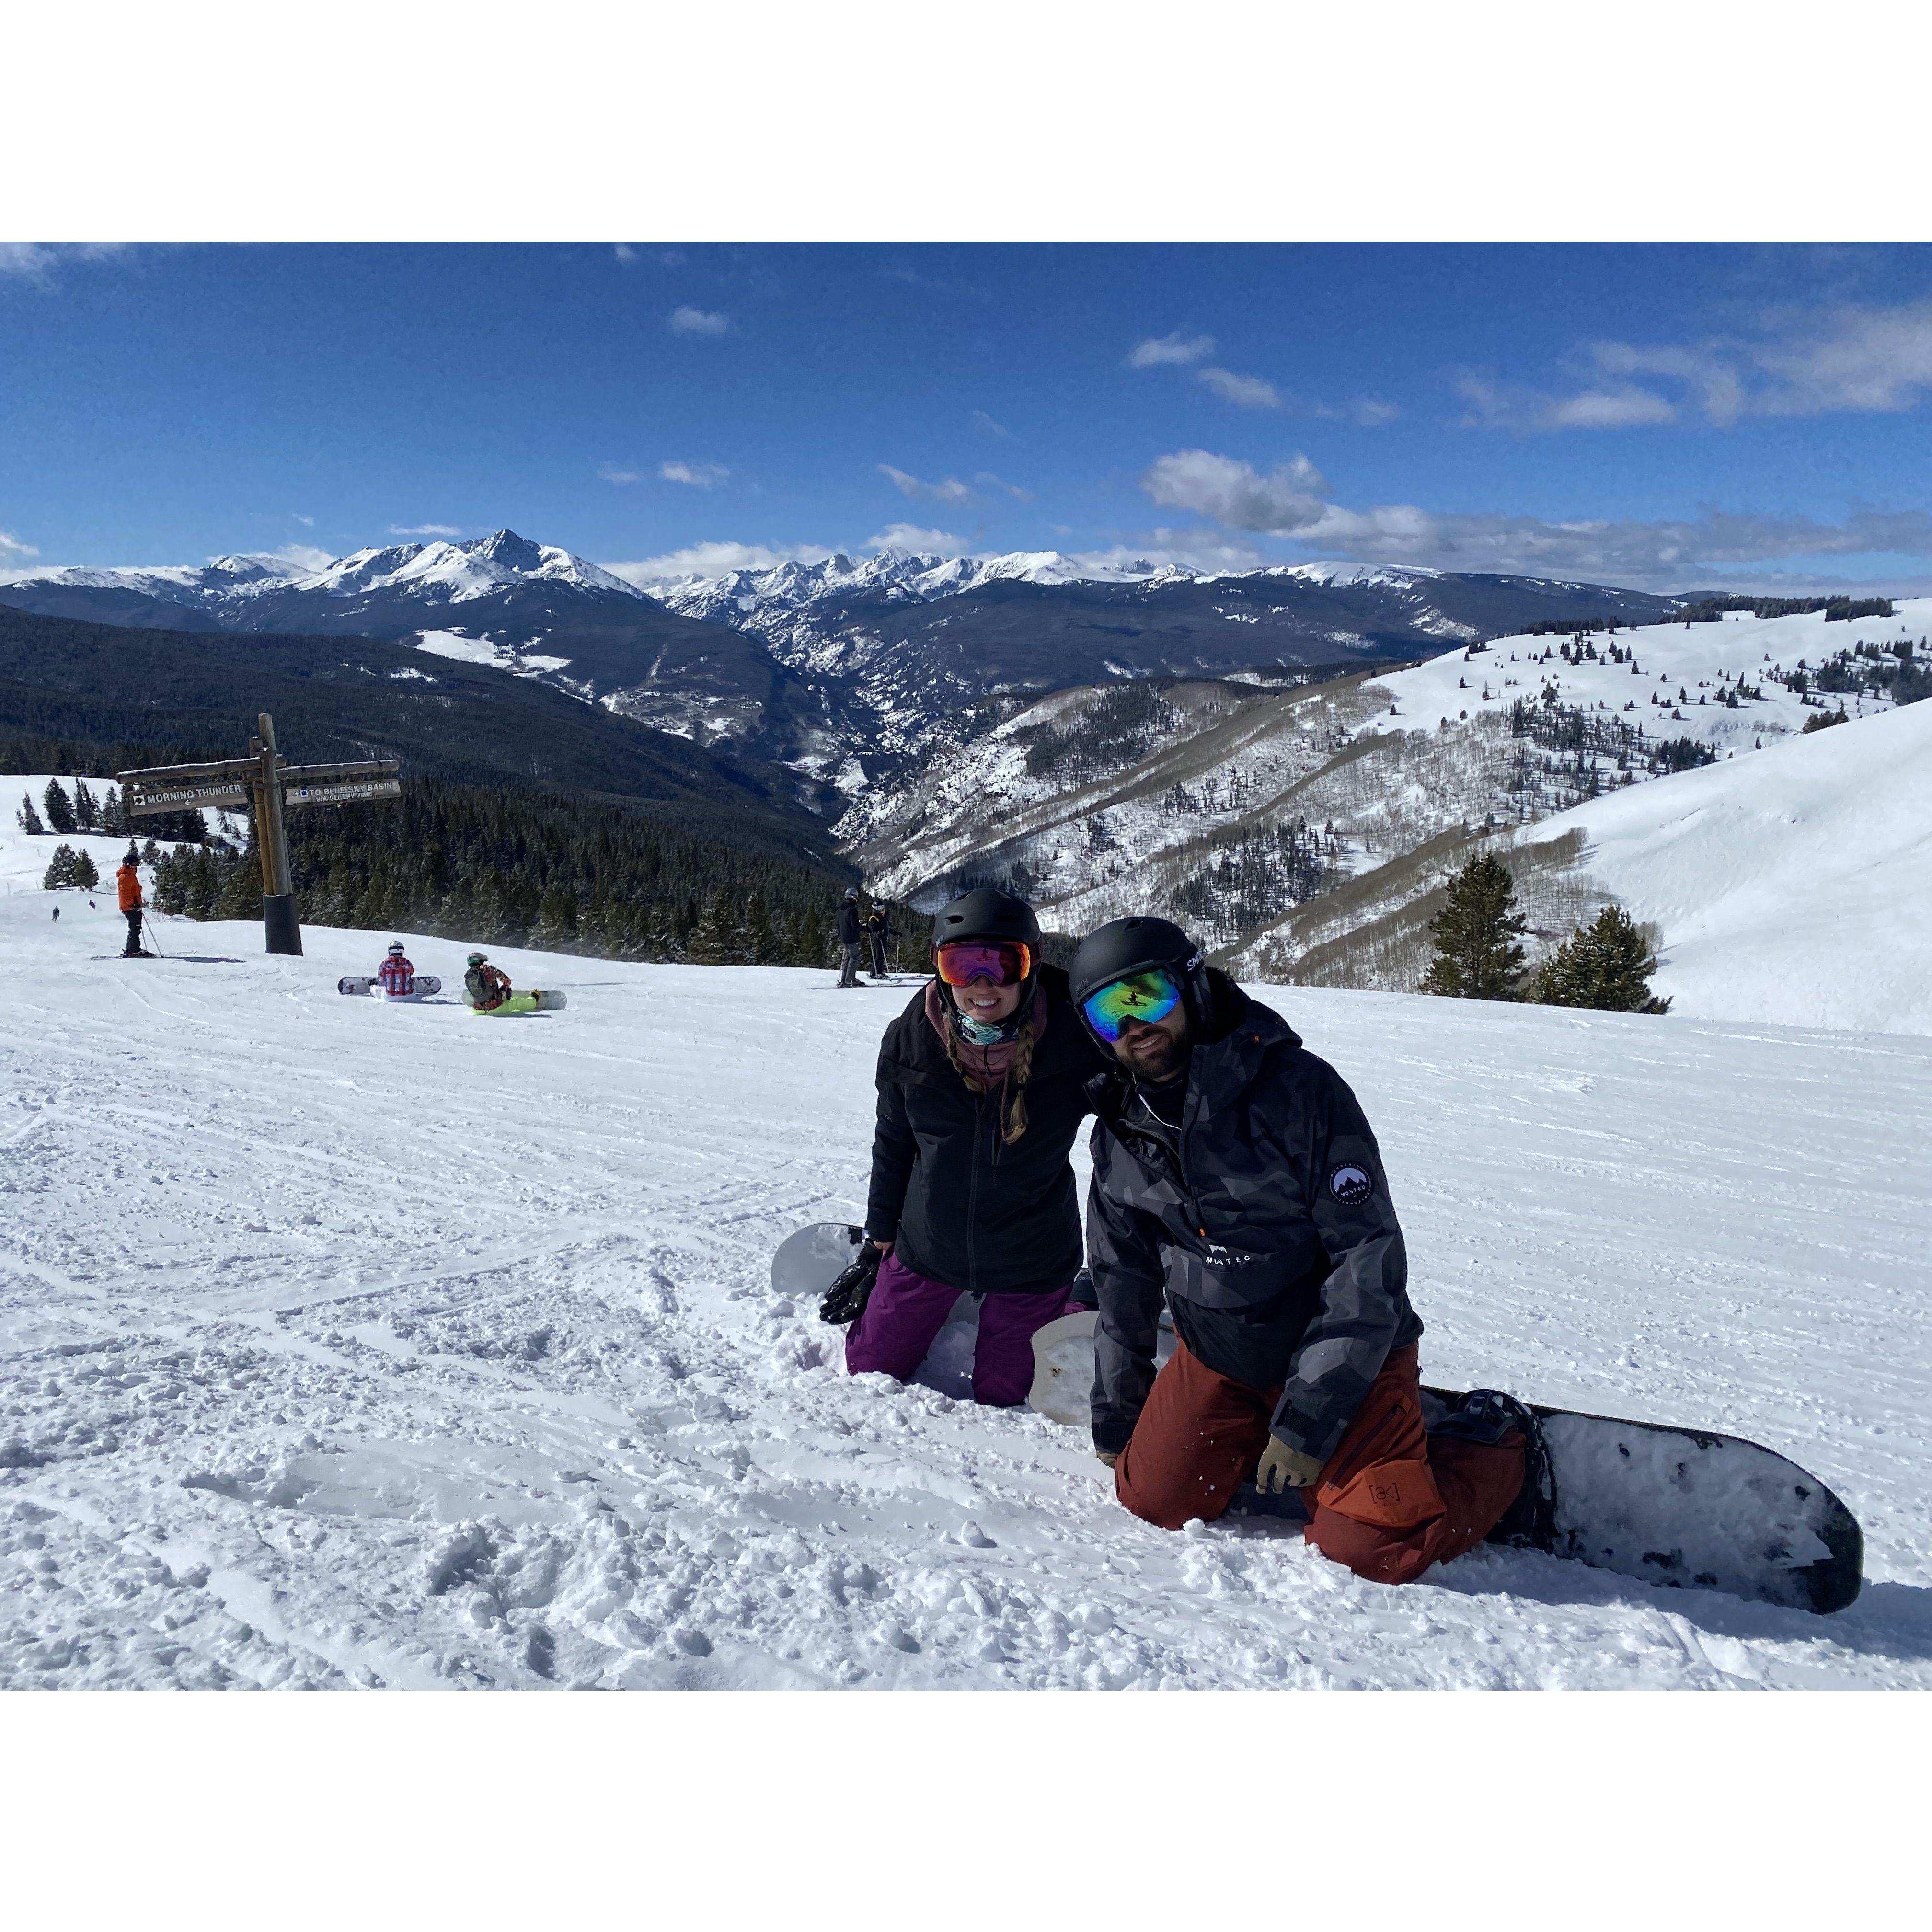 Vail, CO, February 2022